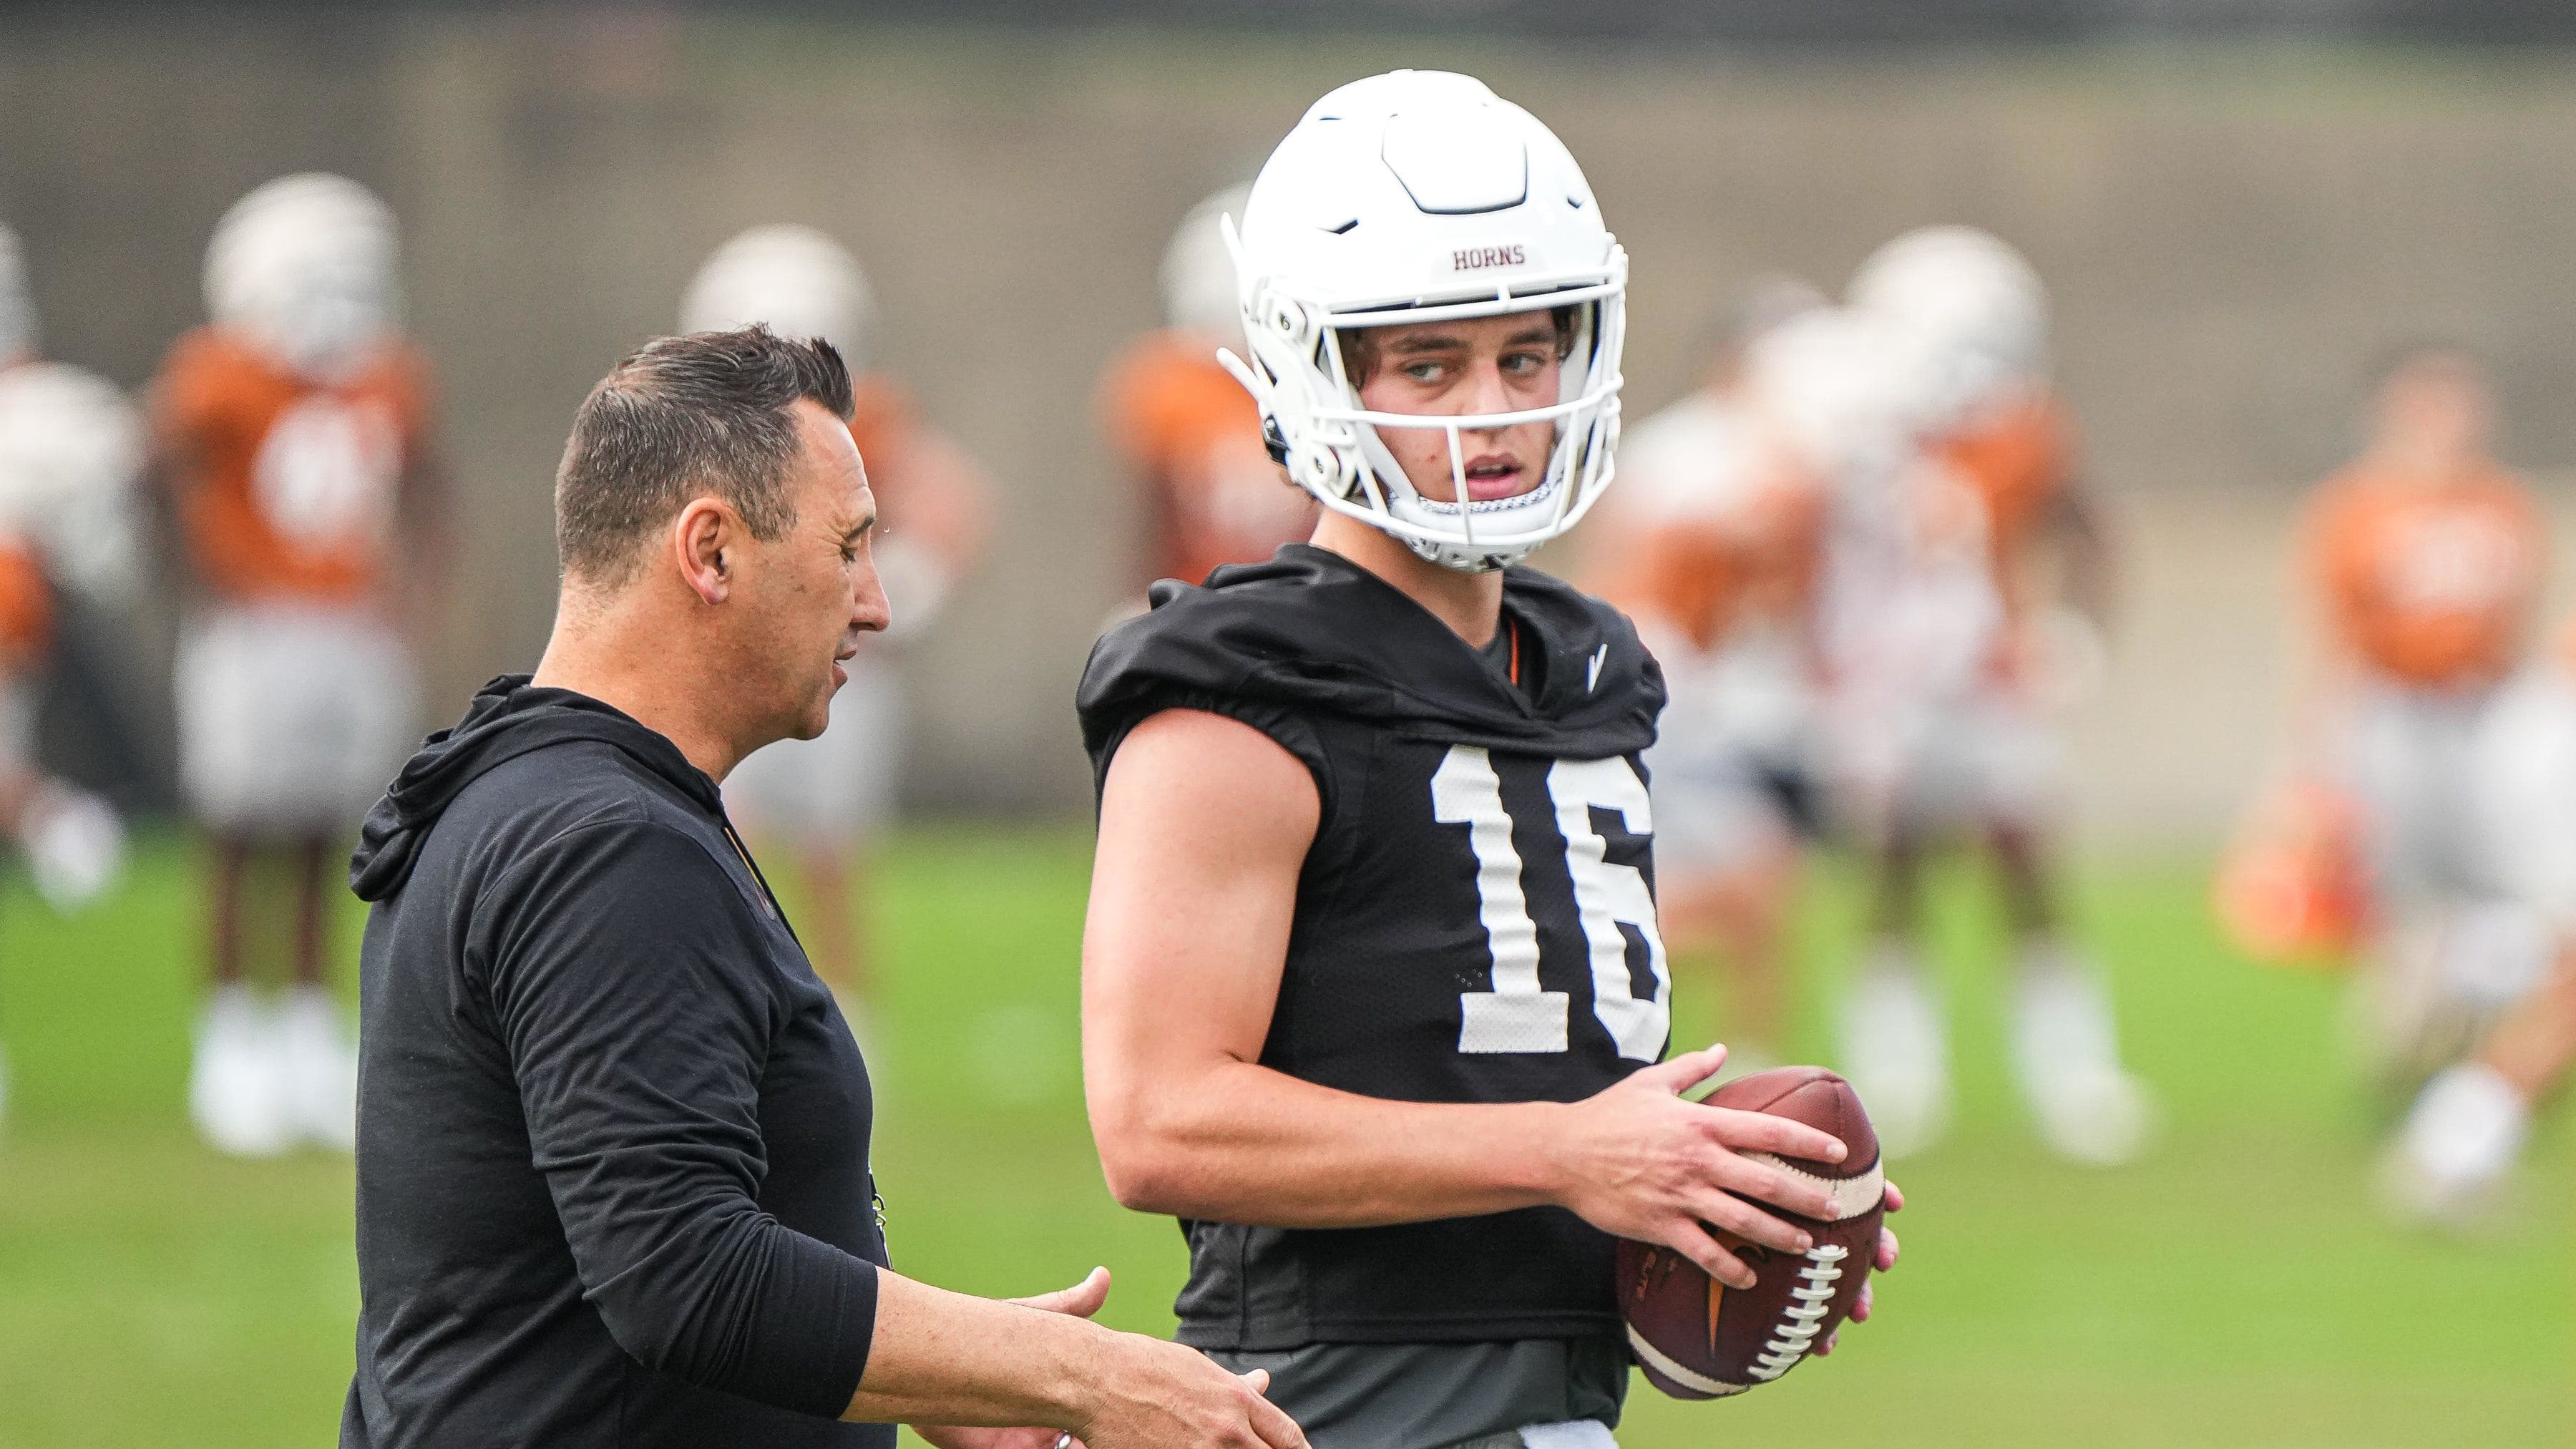 Another Analyst Calls For Arch Manning Transfer From Texas Longhorns; Here's Why He's Wrong